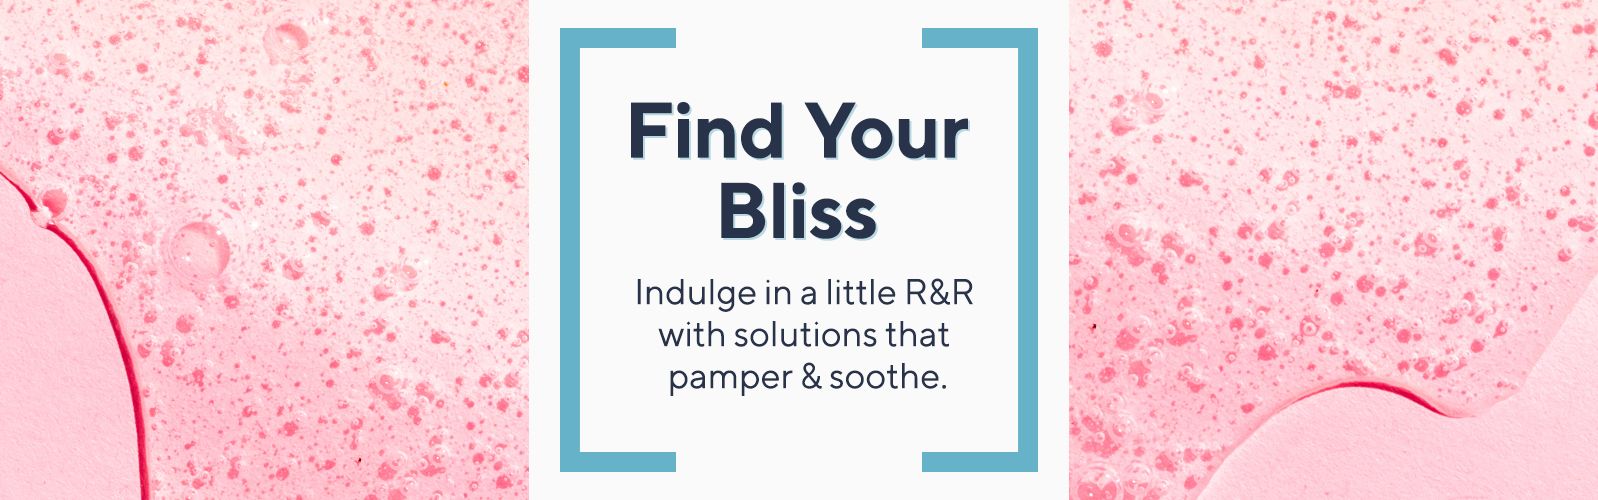 Find Your Bliss. Indulge in a little R&R with solutions that pamper & soothe.